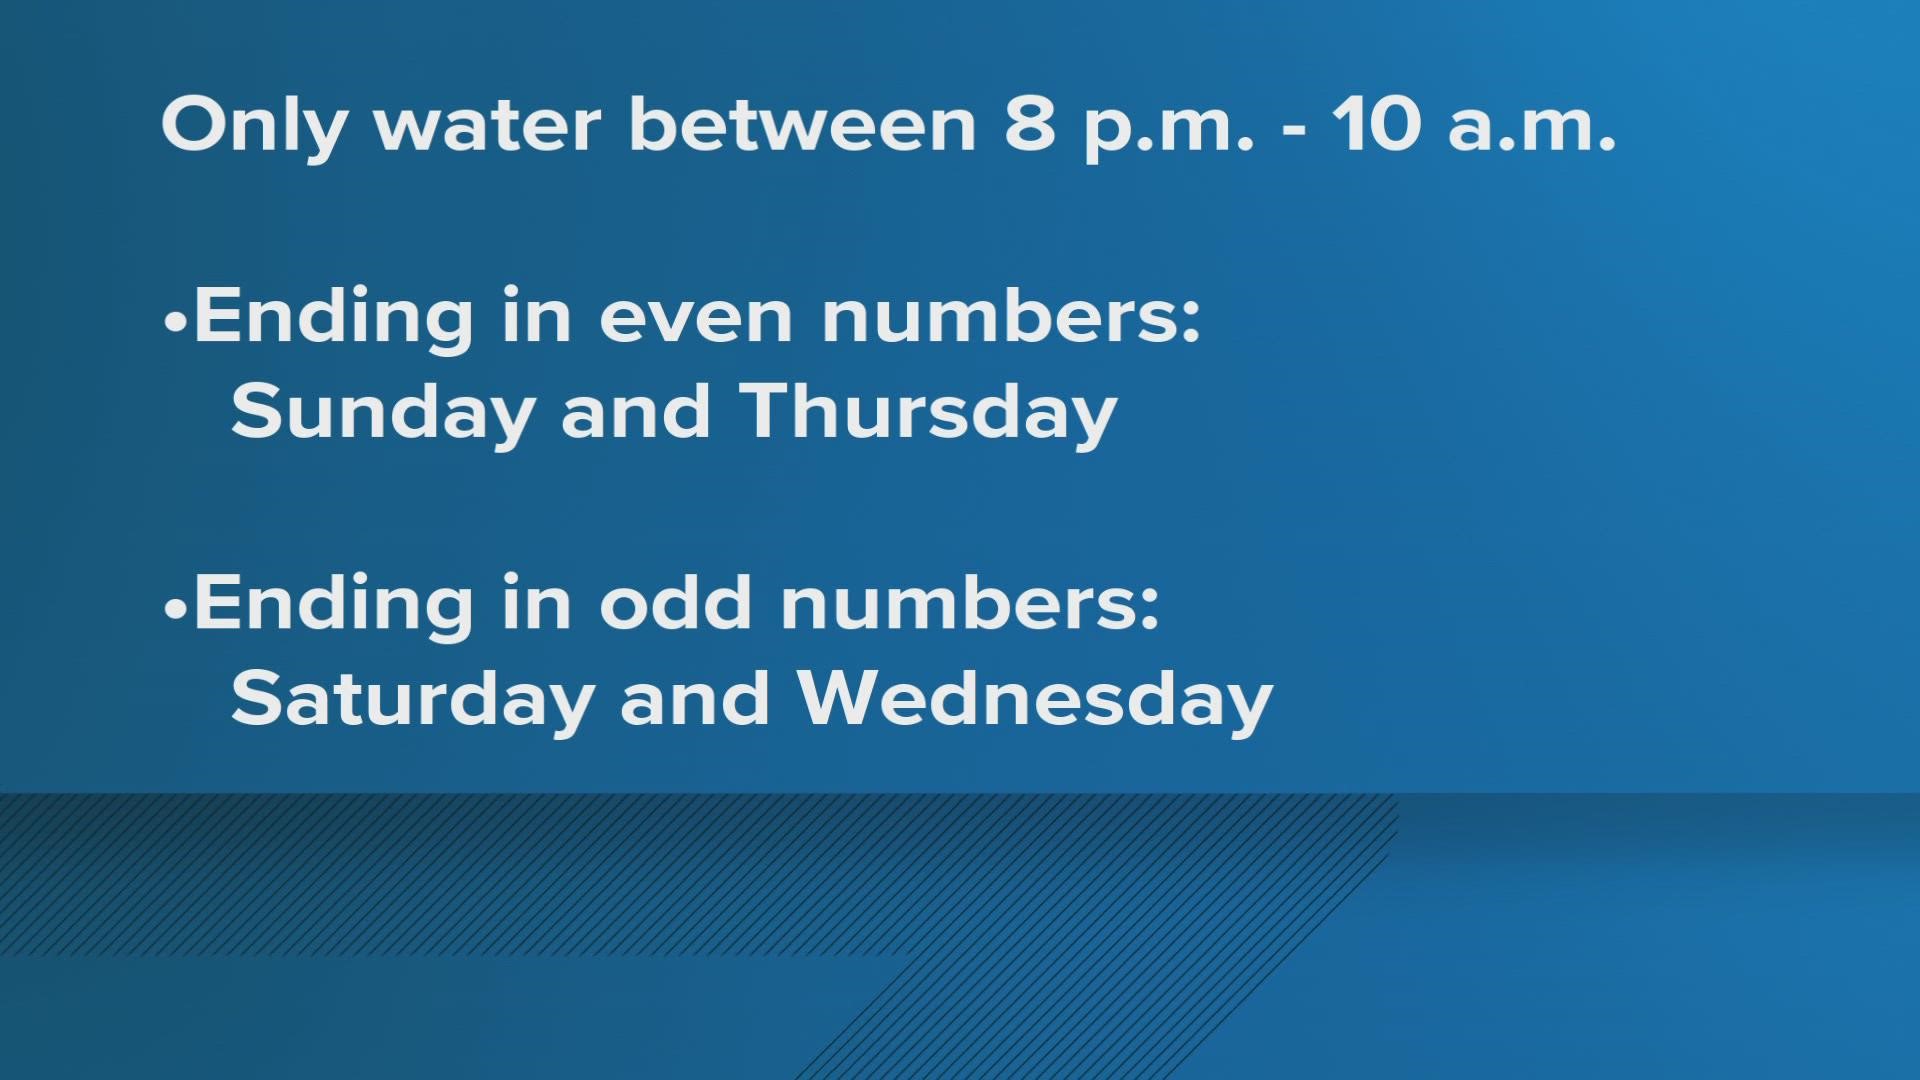 Belton issued a city water schedule to help balance out demand during times of peak usage.